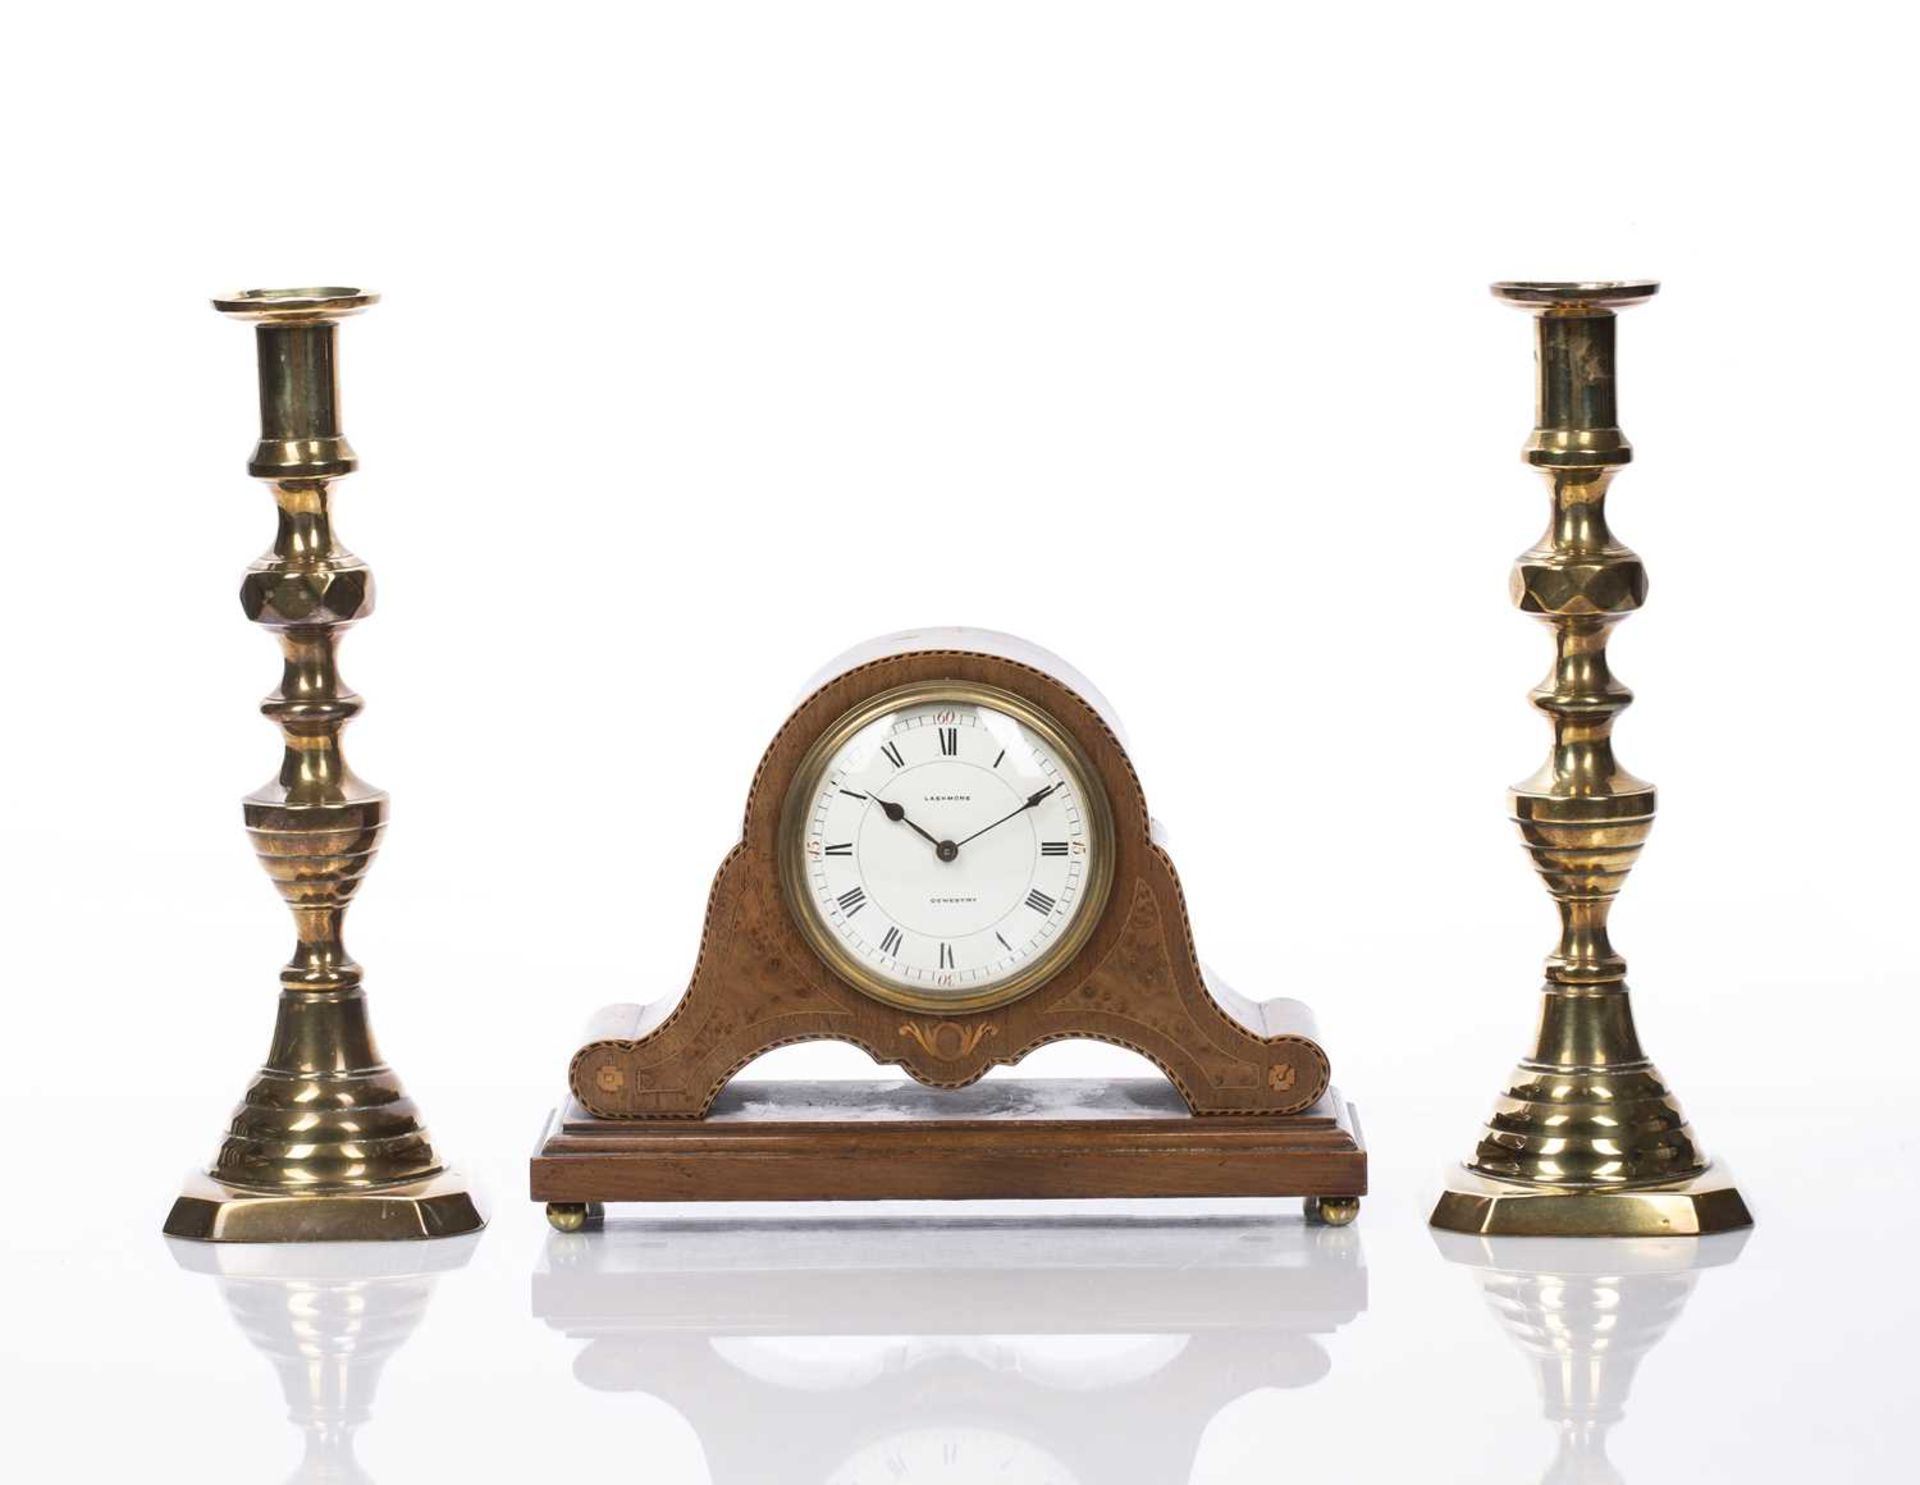 Lashmore of Oswestry walnut mantel clock with marquetry decoration, 17cm high and a pair of brass